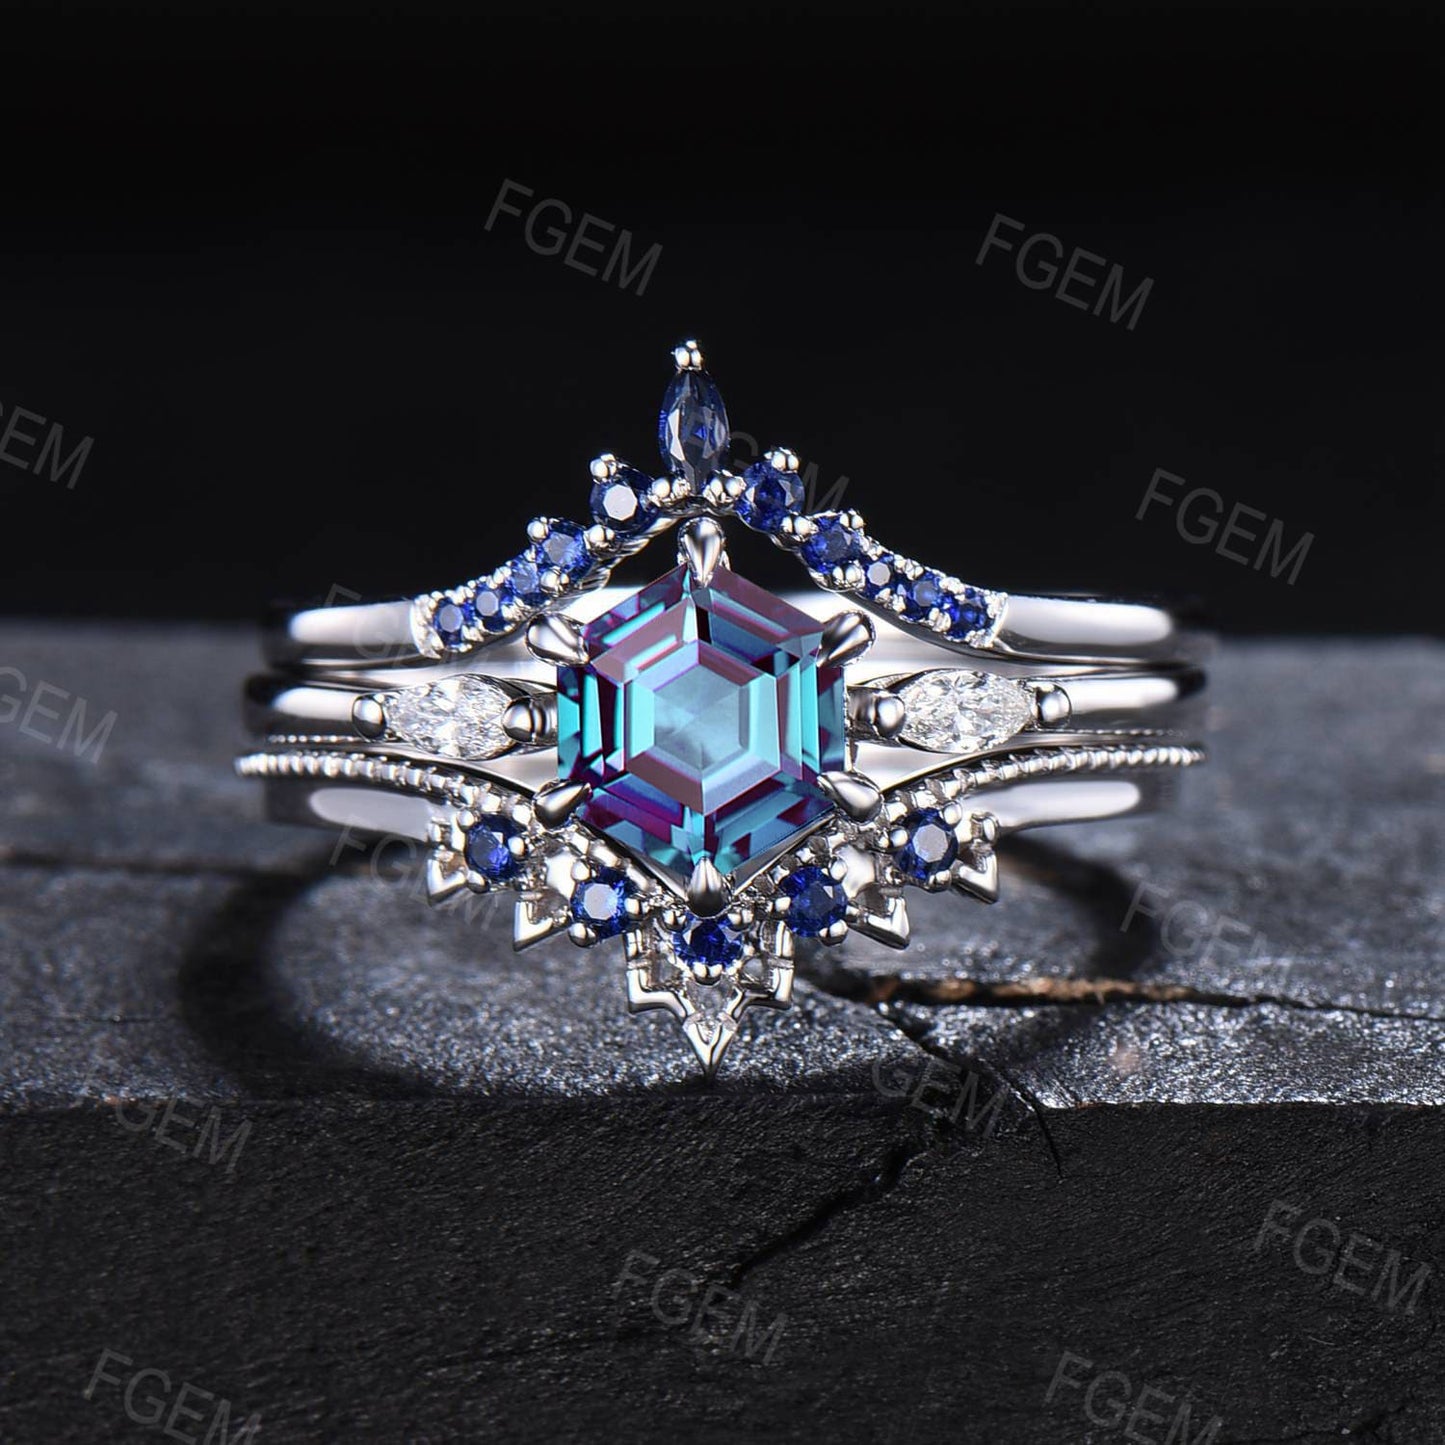 1ct Hexagon Cut Color-Change Alexandrite Ring Set Sterling Silver Alexandrite Blue Sapphire Wedding Ring June Birthstone Promise Ring Gifts